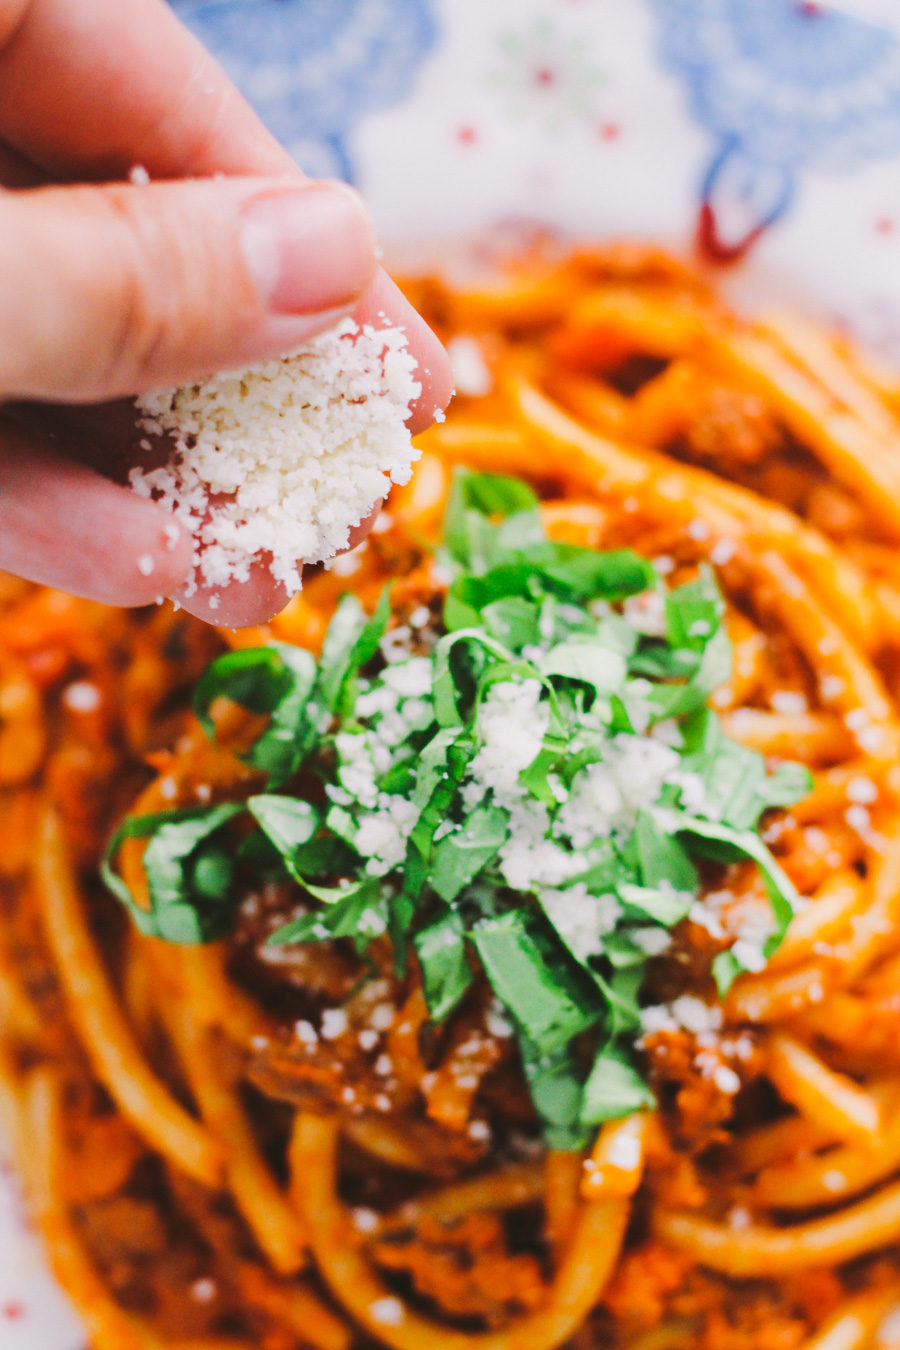 An overhead shot of ground turkey bolognese sauce served with bucatini atop a colorful patterned plate. The pasta has been garnished with fresh chopped basil. A woman's hand works to sprinkle fresh grated parmesan cheese overtop of the pasta.